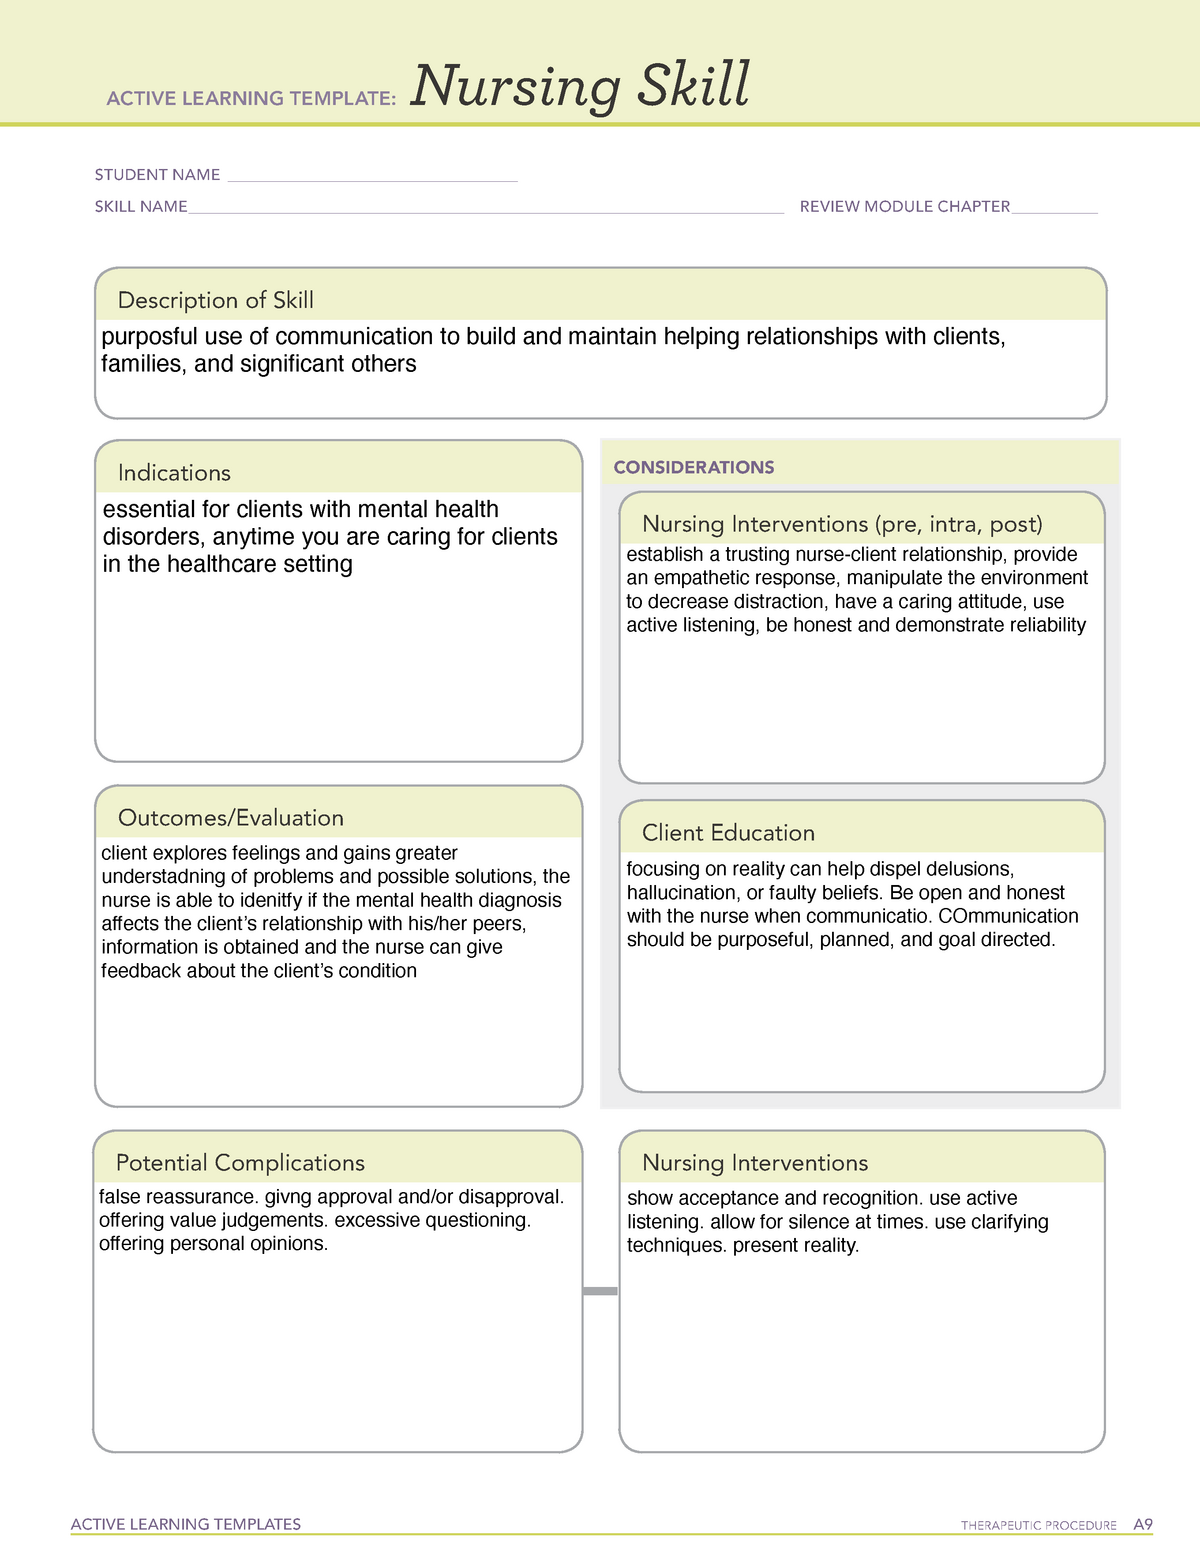 Skill Thera Communication - ACTIVE LEARNING TEMPLATES THERAPEUTIC ...